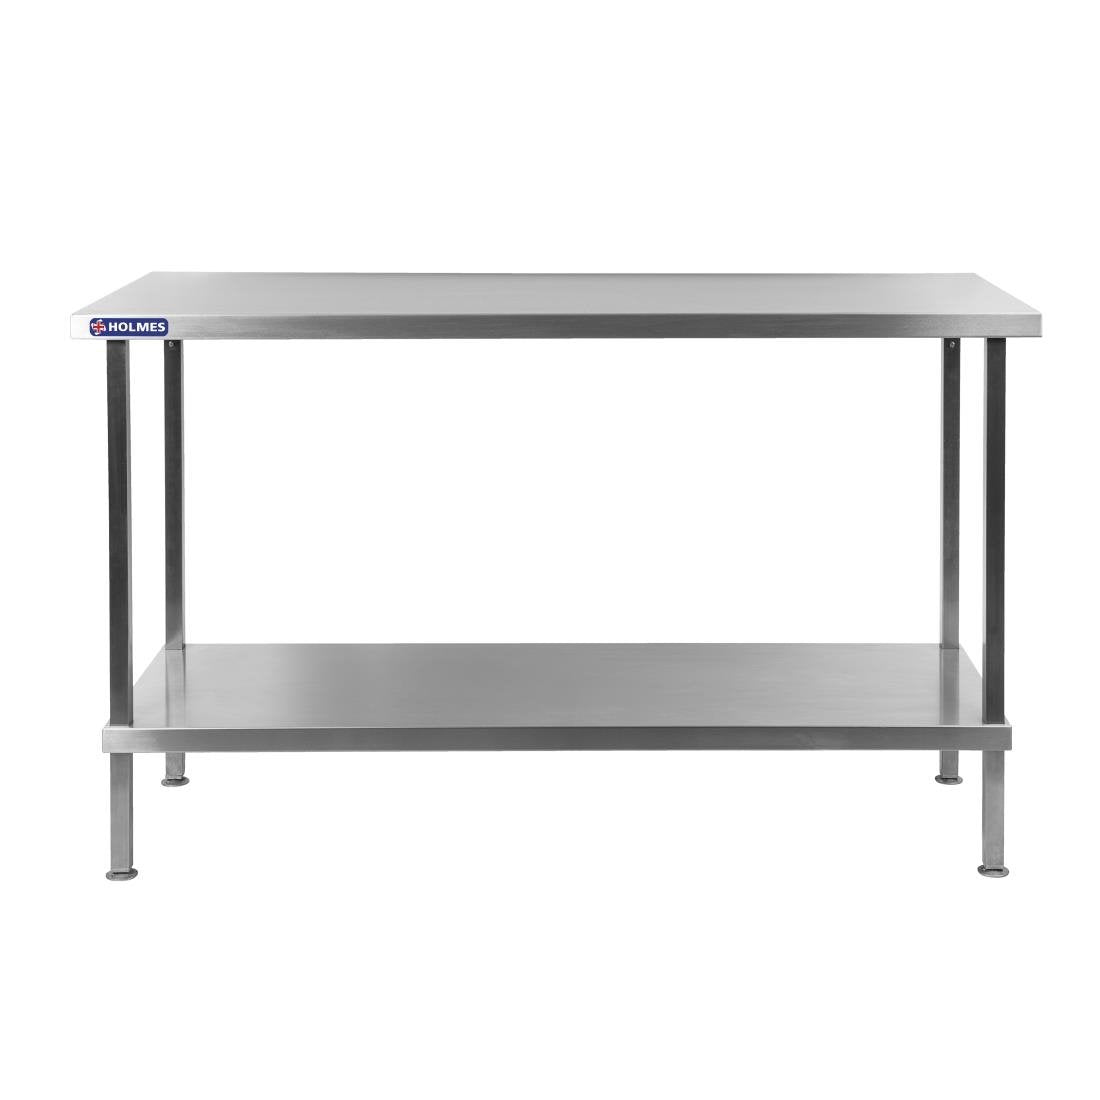 DR059 Holmes Stainless Steel Centre Table 2100mm JD Catering Equipment Solutions Ltd